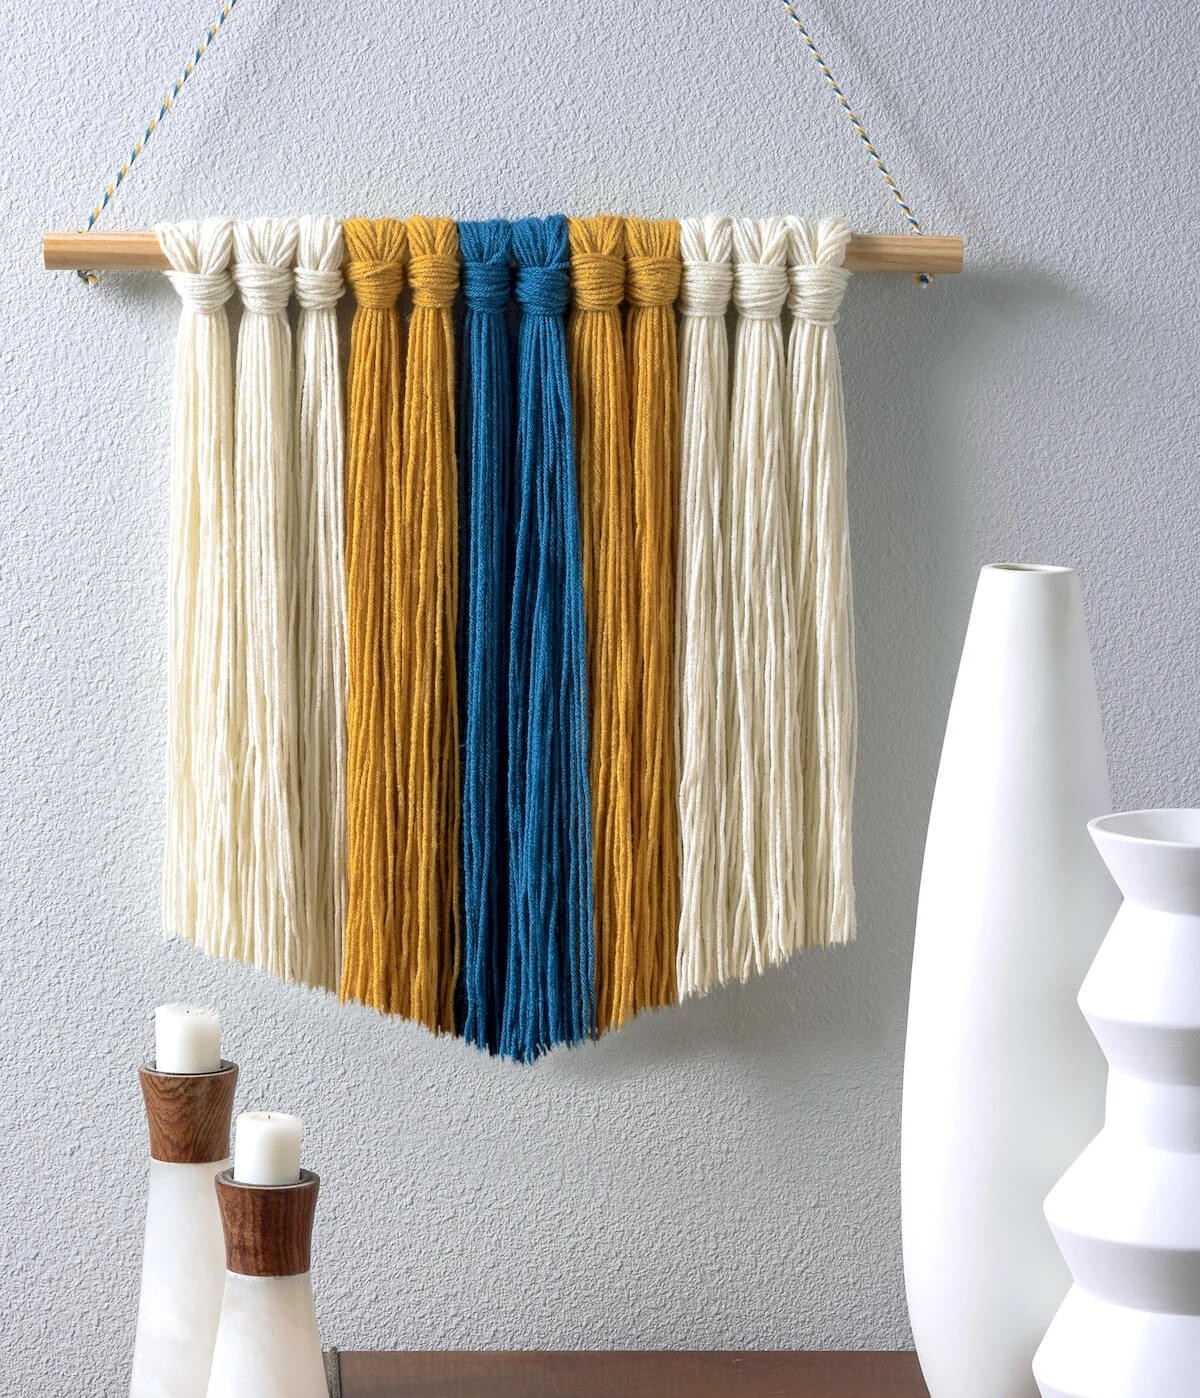 Classy Yarn Wall Hanging Craft Decor : Crafts to Make With Yarn Without Knitting